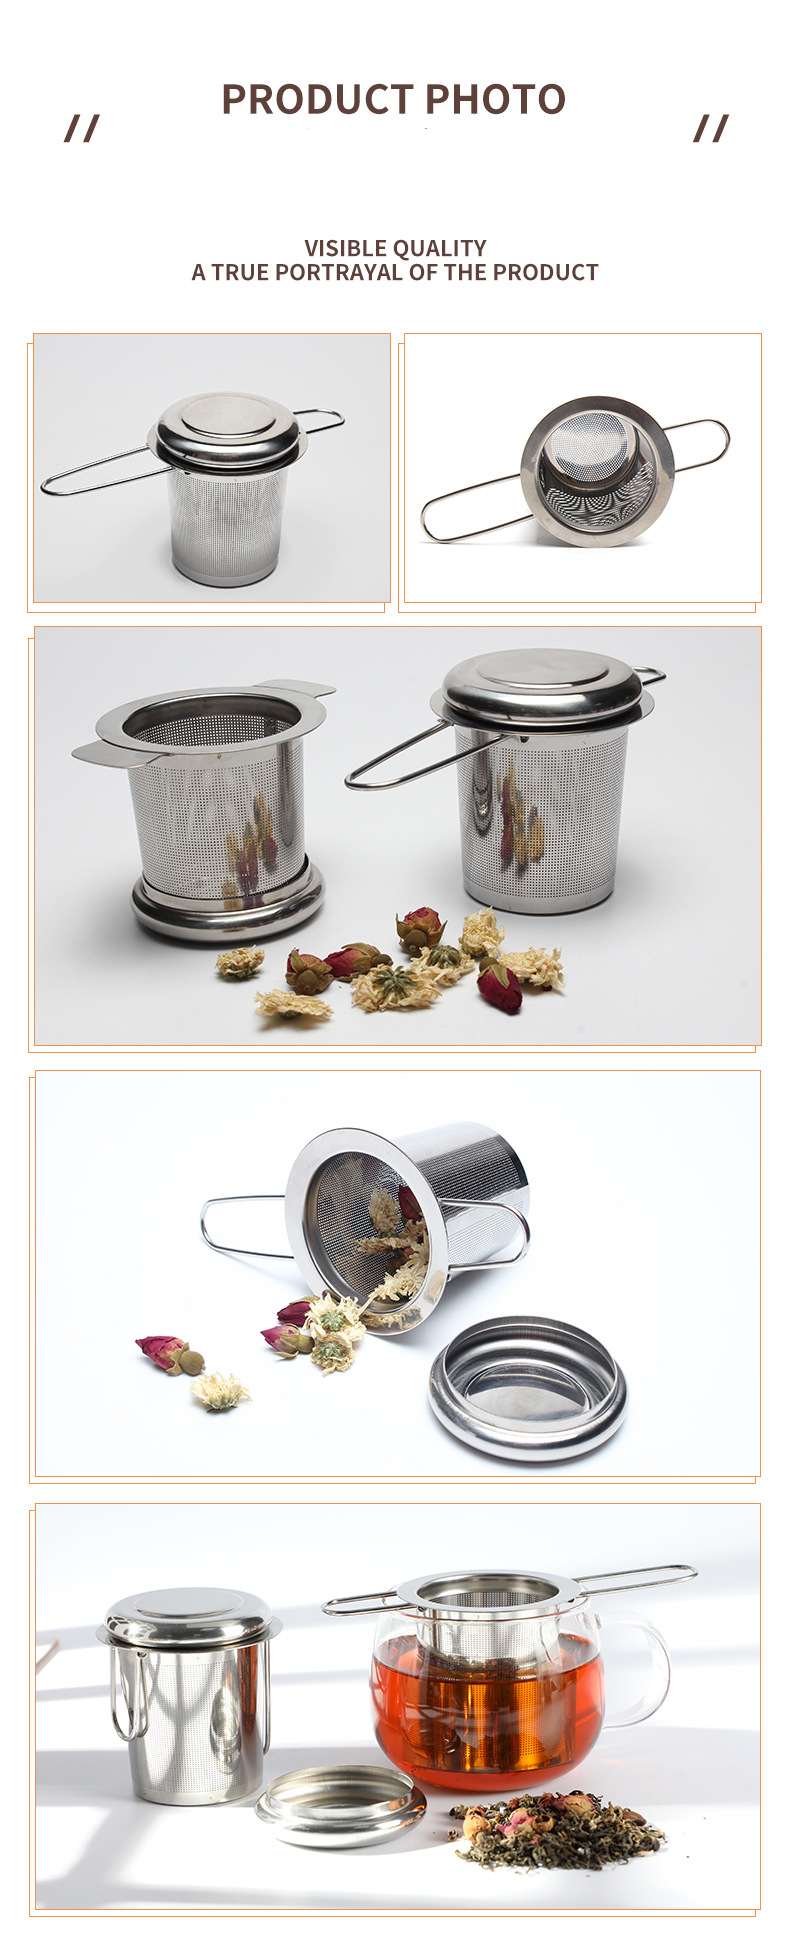 Creative tea maker with folding handle and stainless steel tea strainer-03.jpg